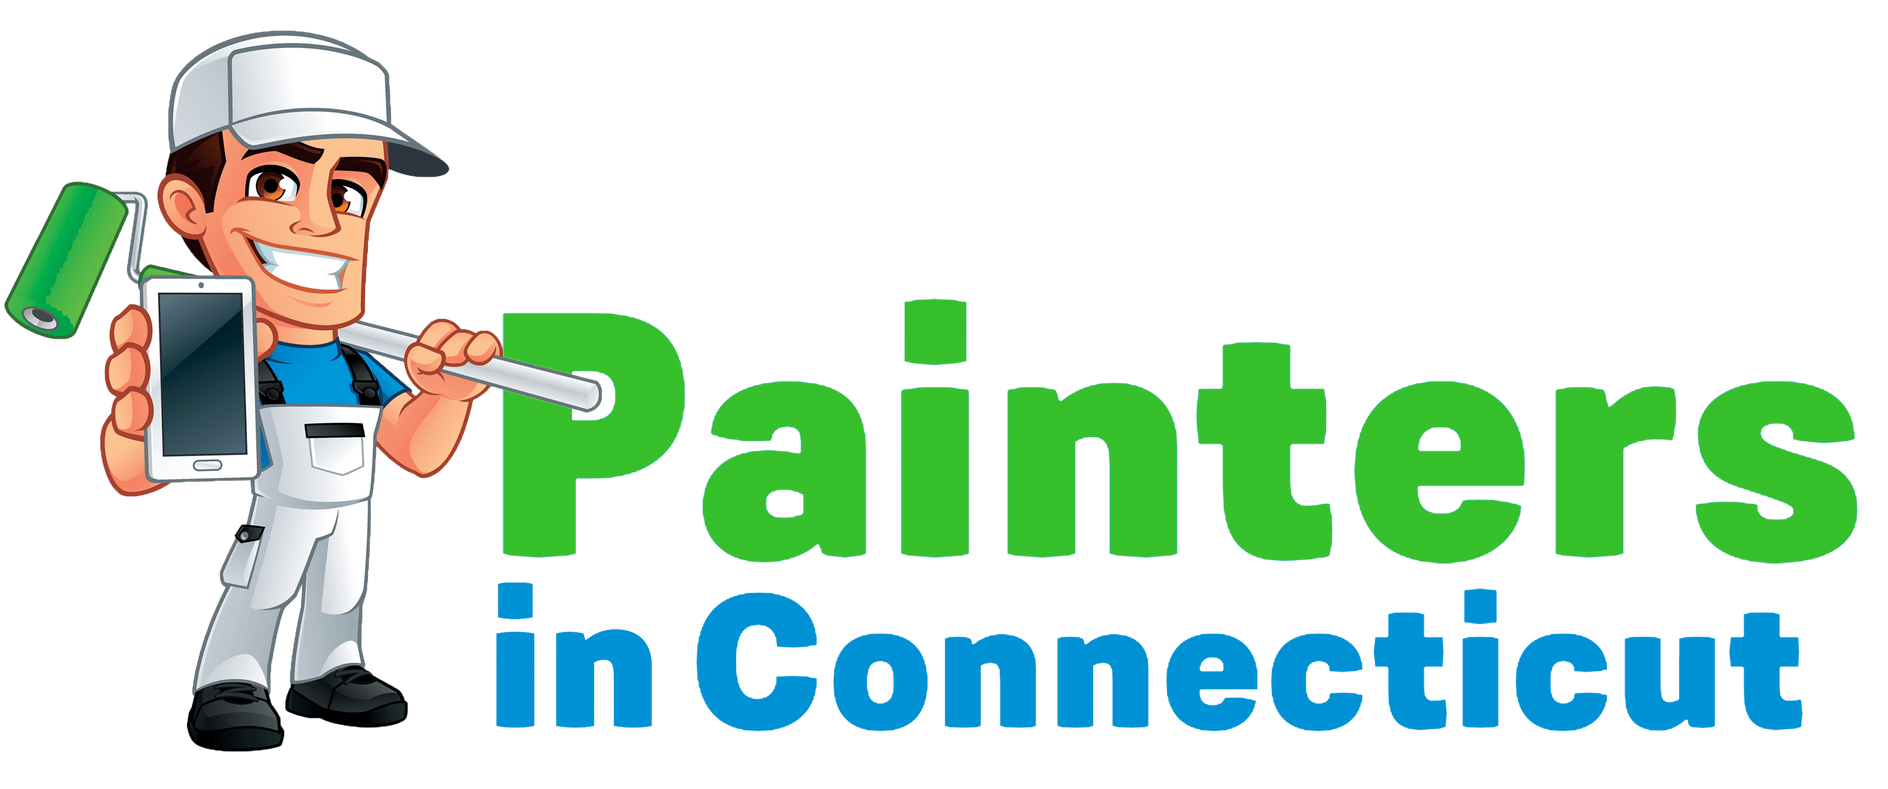 Painters in CT and New Haven Painters